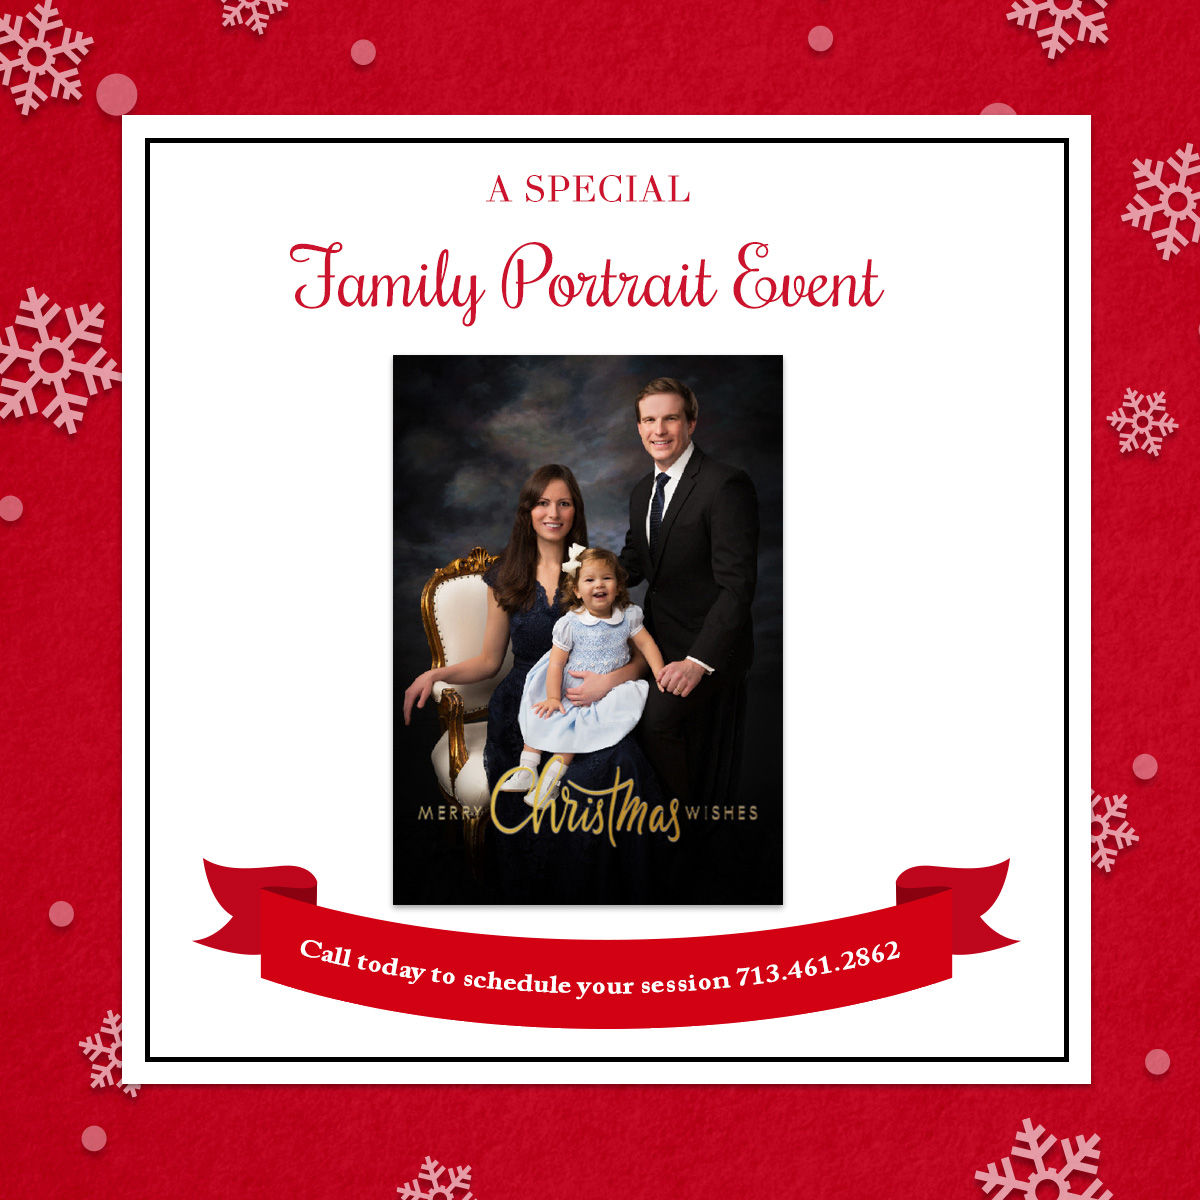 Family Portrait Photography Holiday Cards in Houston